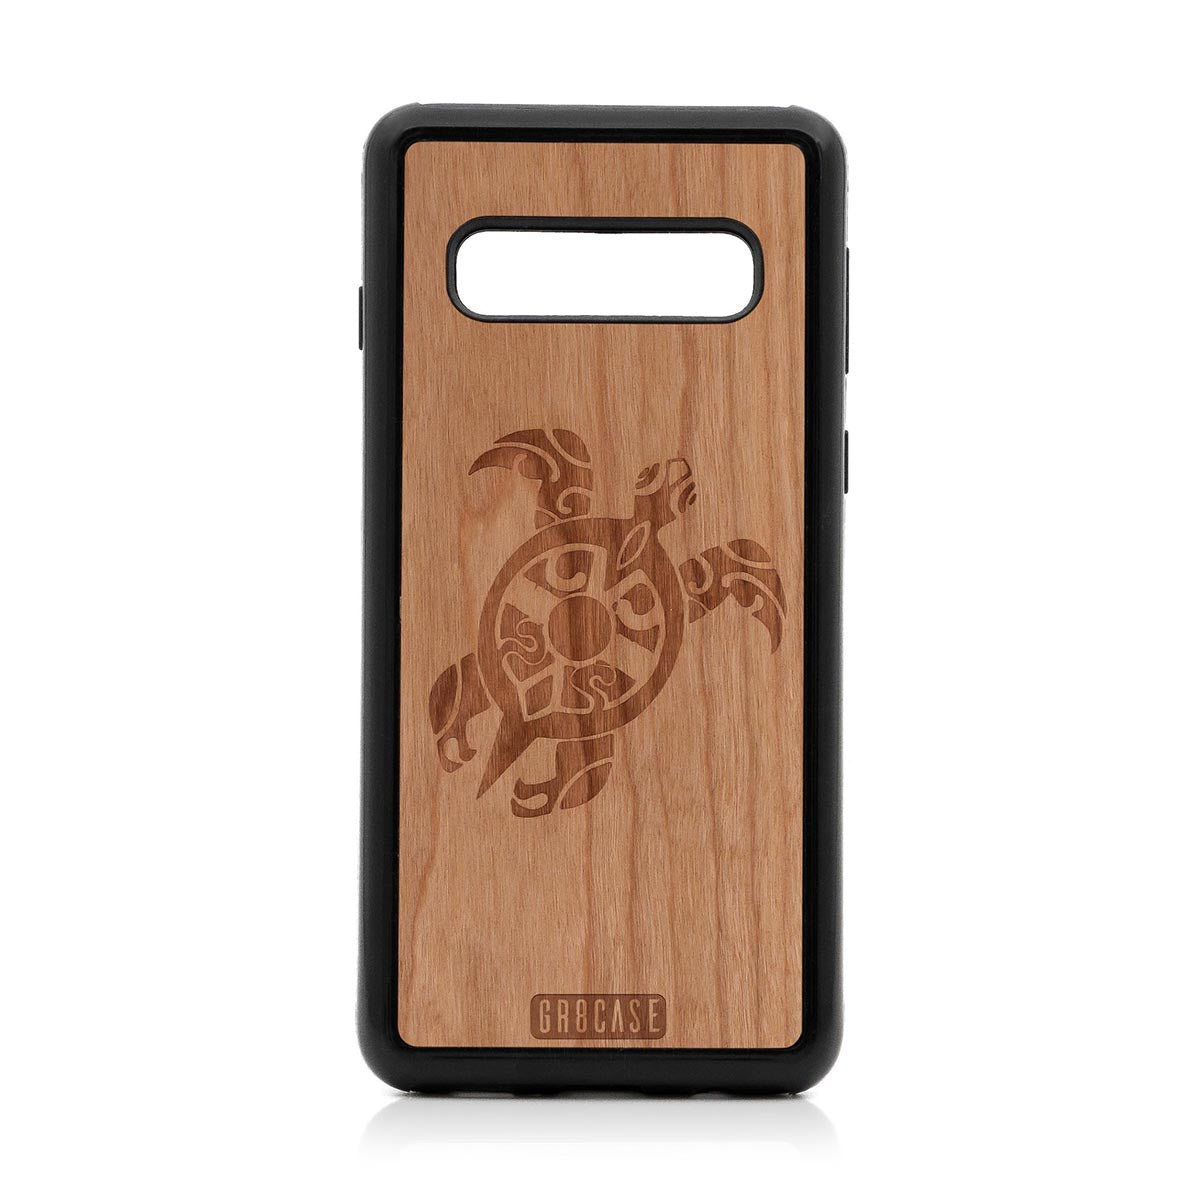 Turtle Design Wood Case For Samsung Galaxy S10